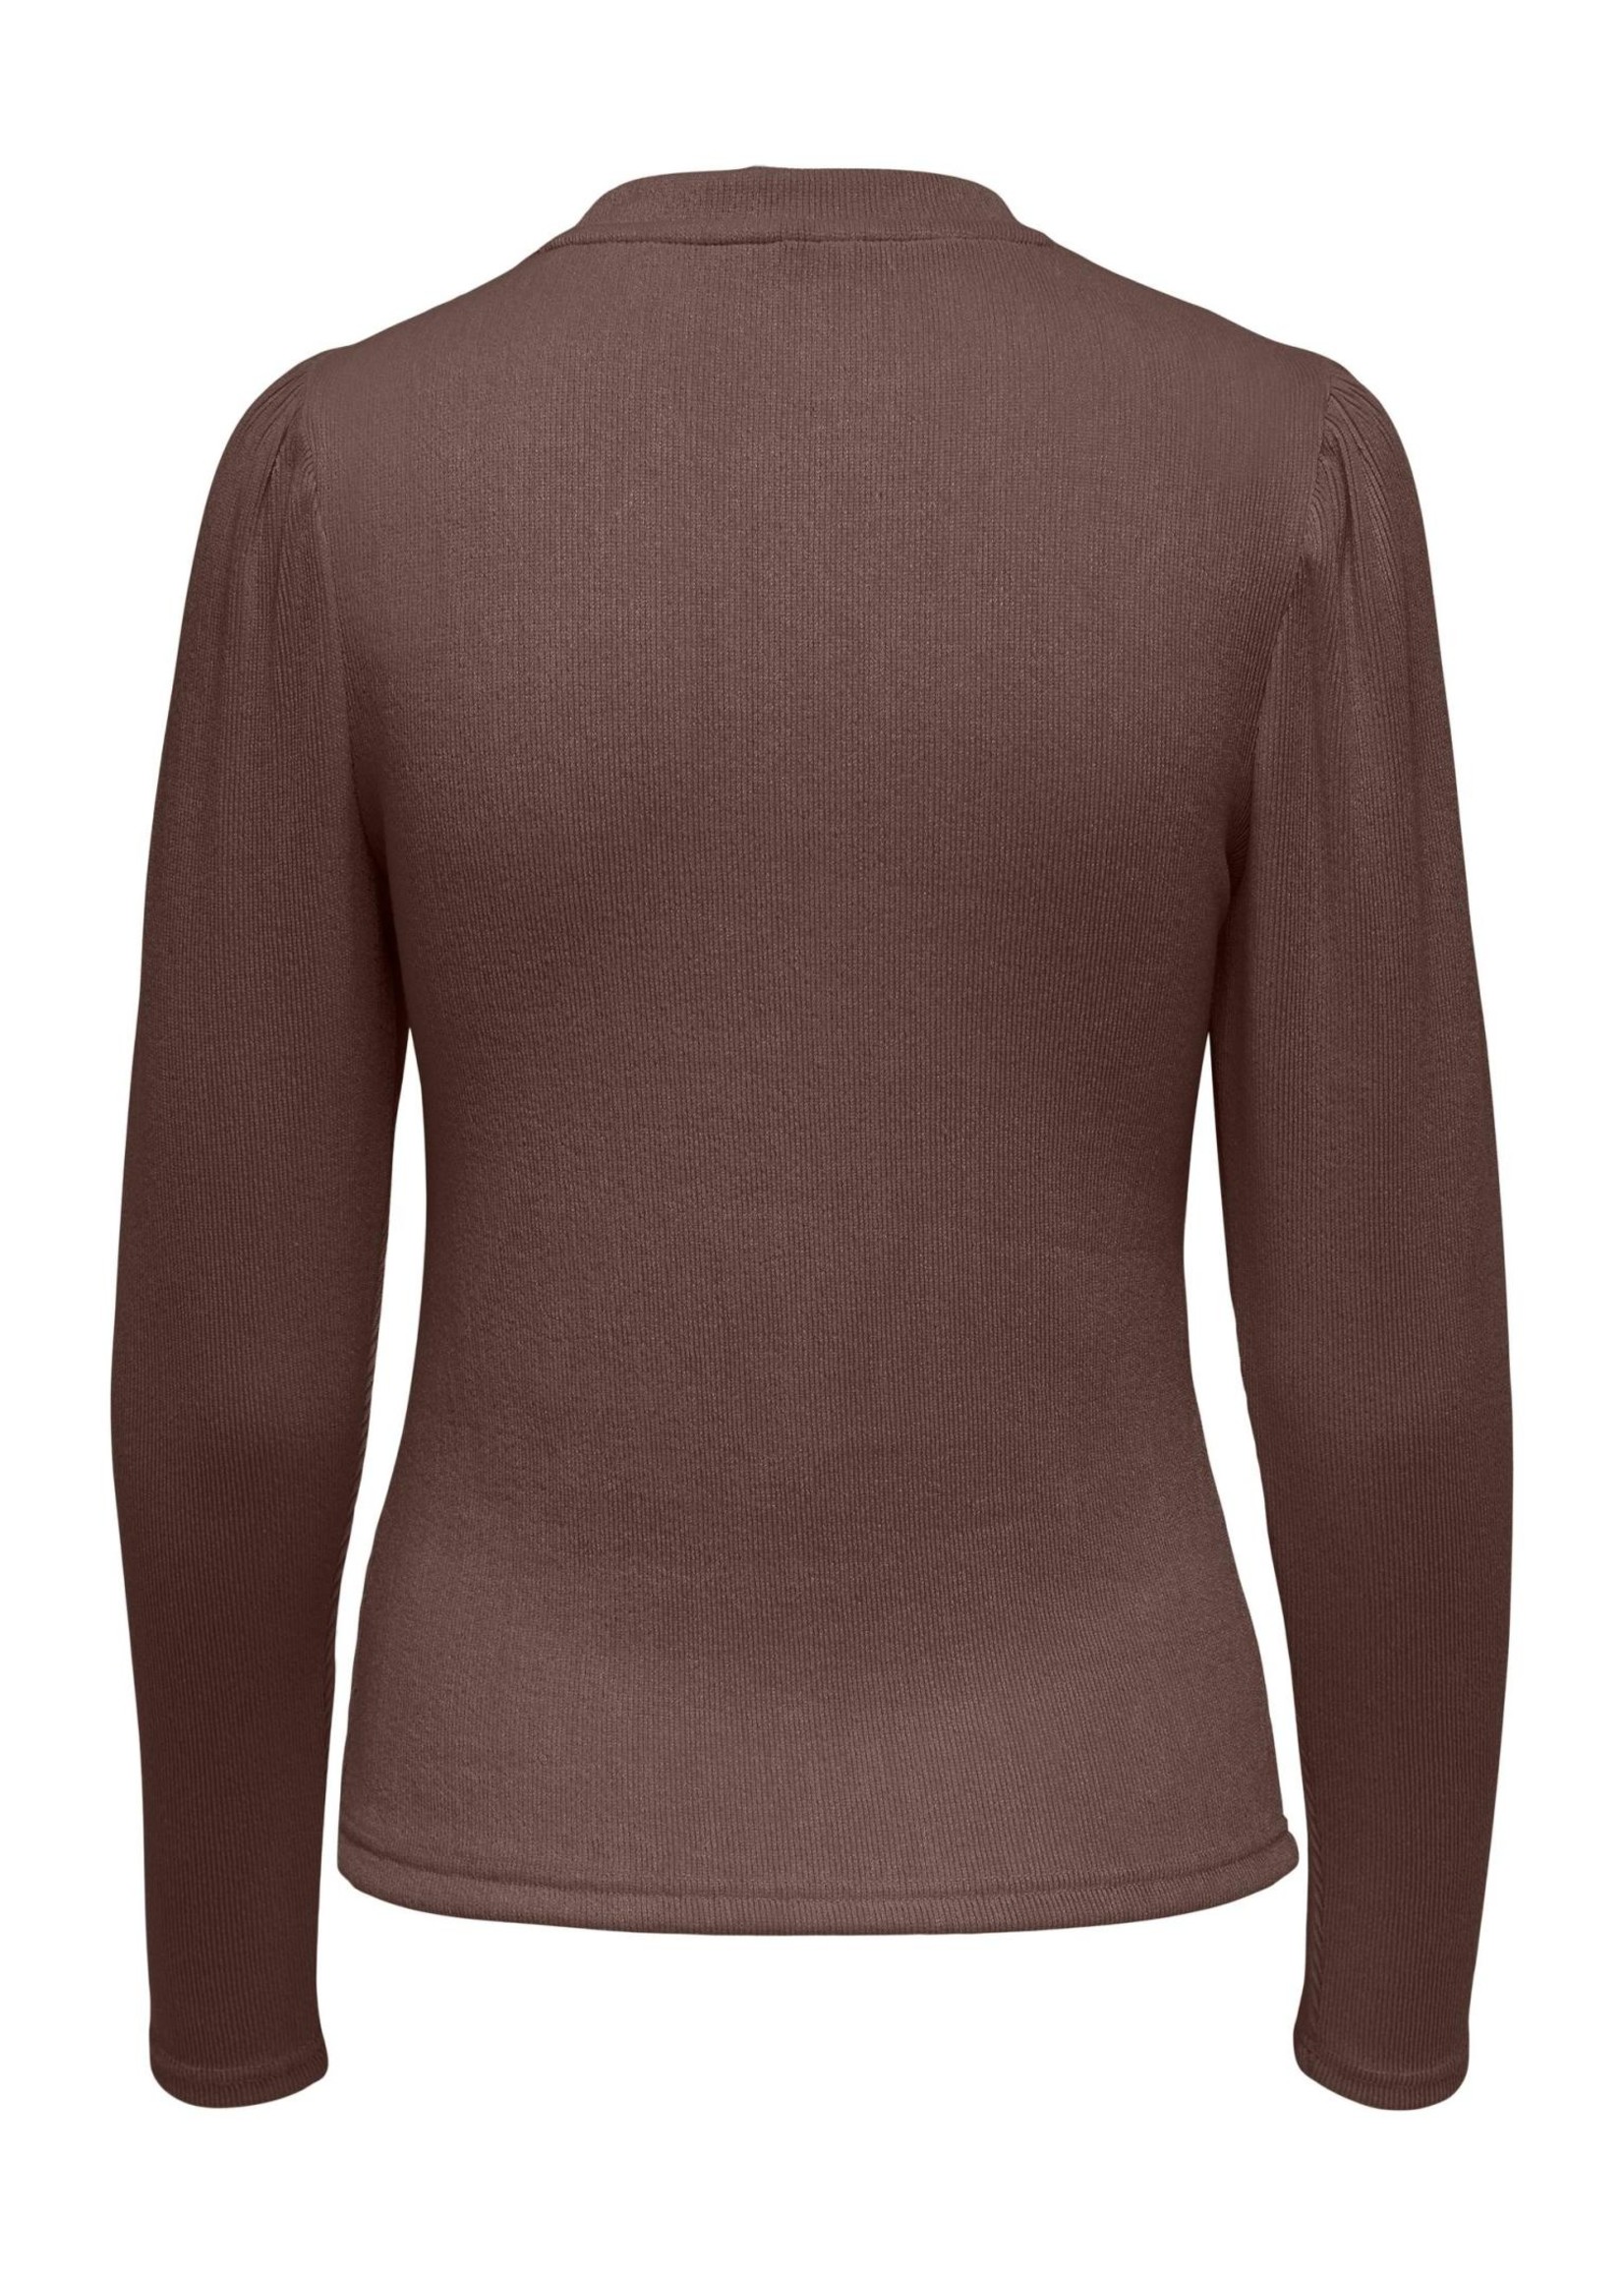 ONLY NANNA L/S PUFF TOP JRS chocolate martini